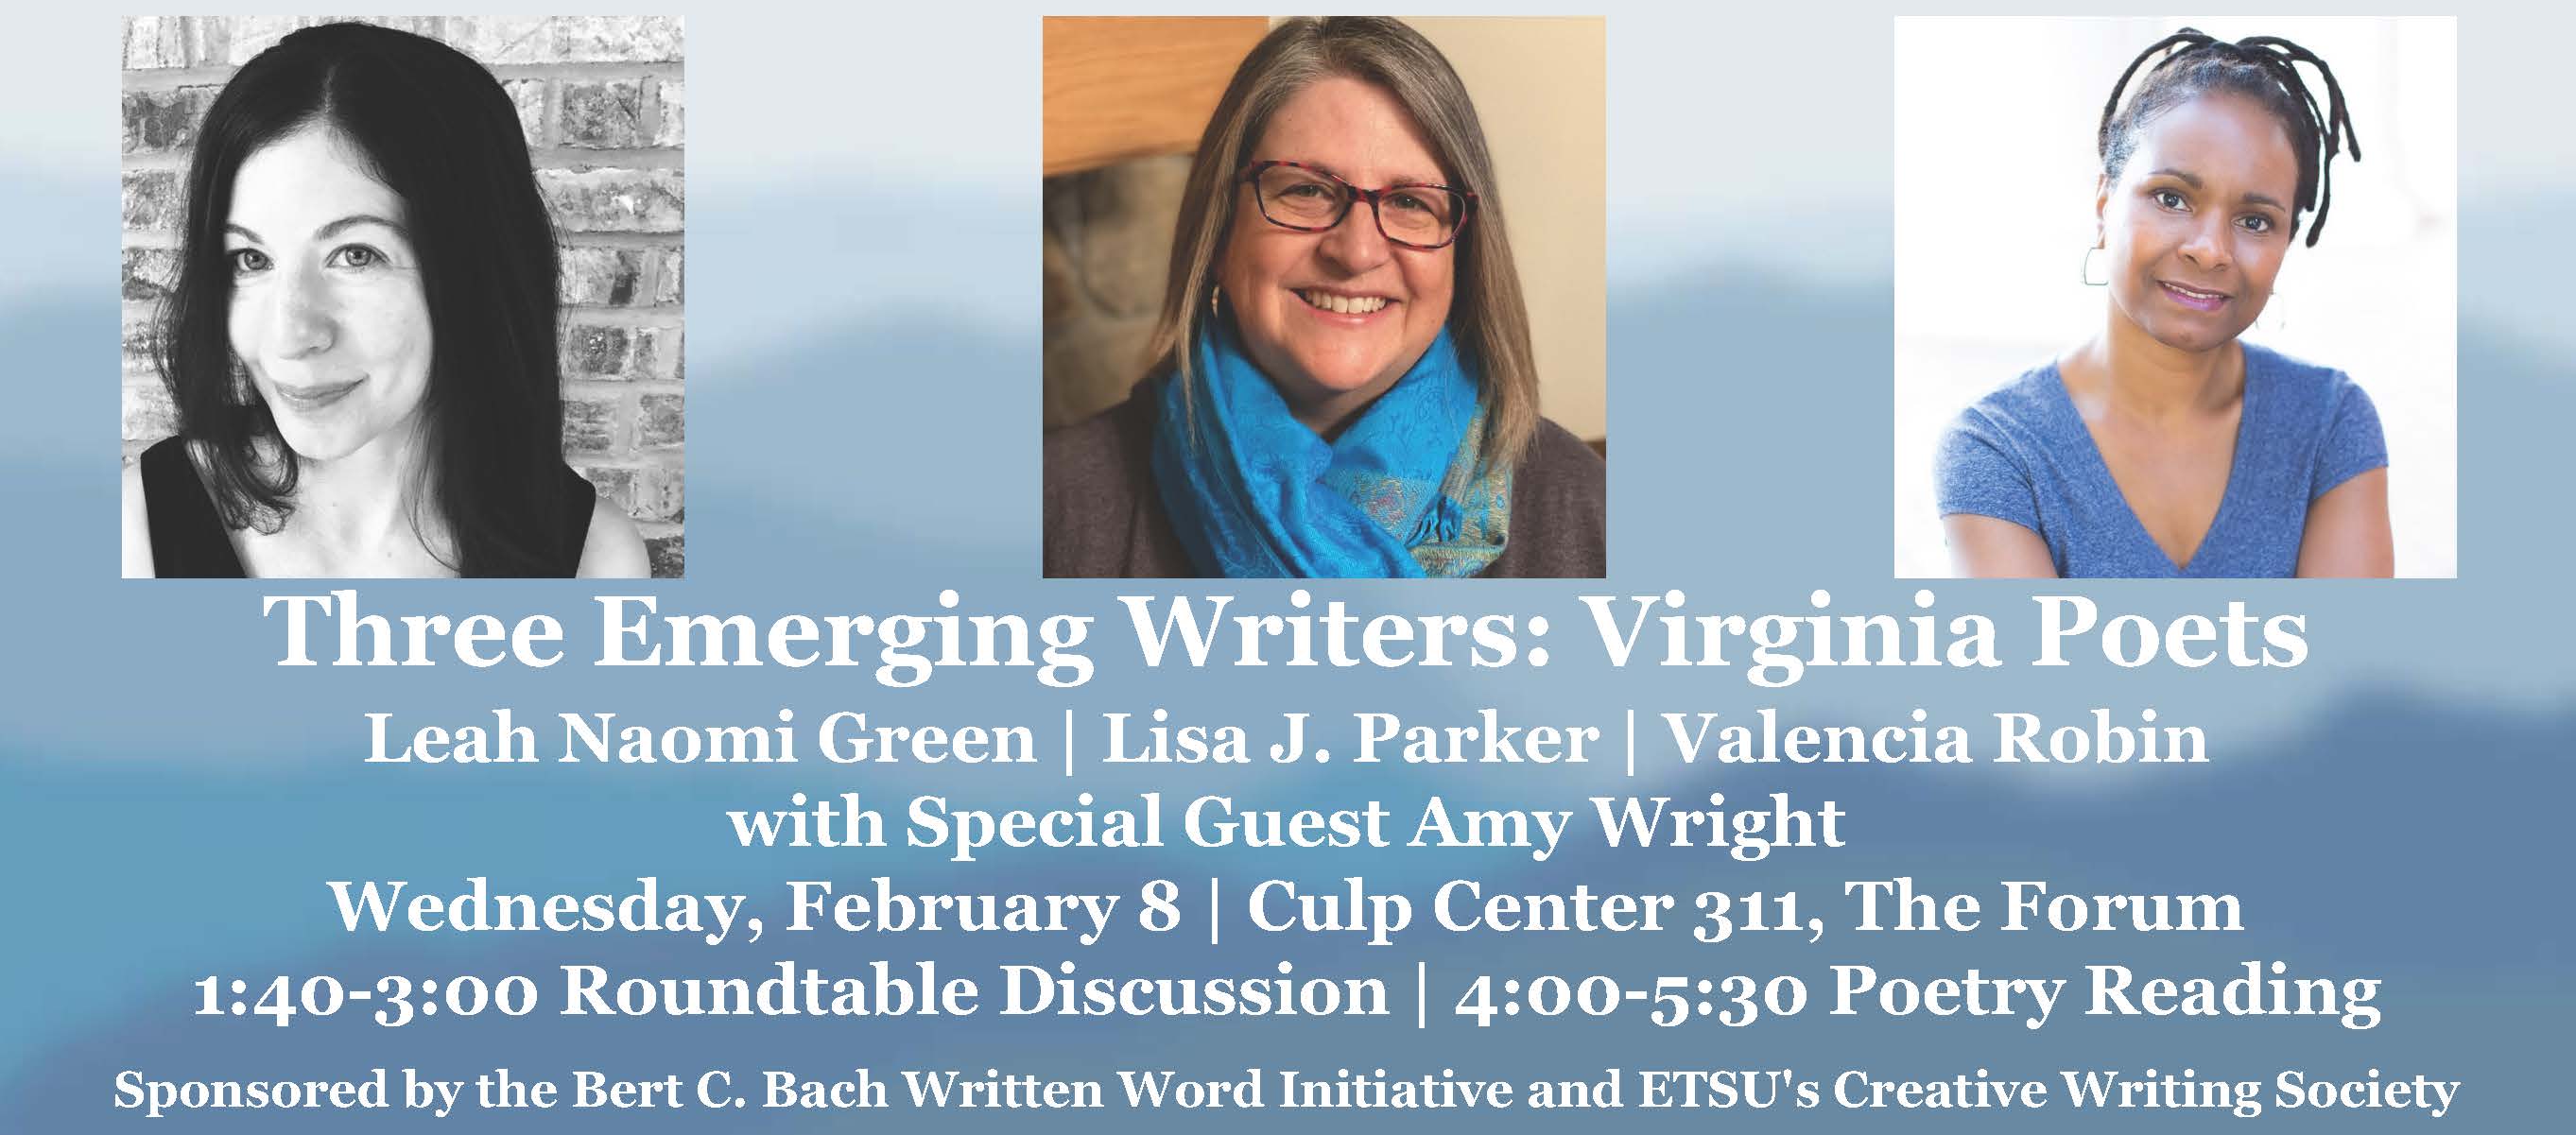 Photos of Leah Naomi Green, Lisa J. Parker, and Valencia Robin on a background of the Blue Ridge Mountains with event information detailed in the caption below.